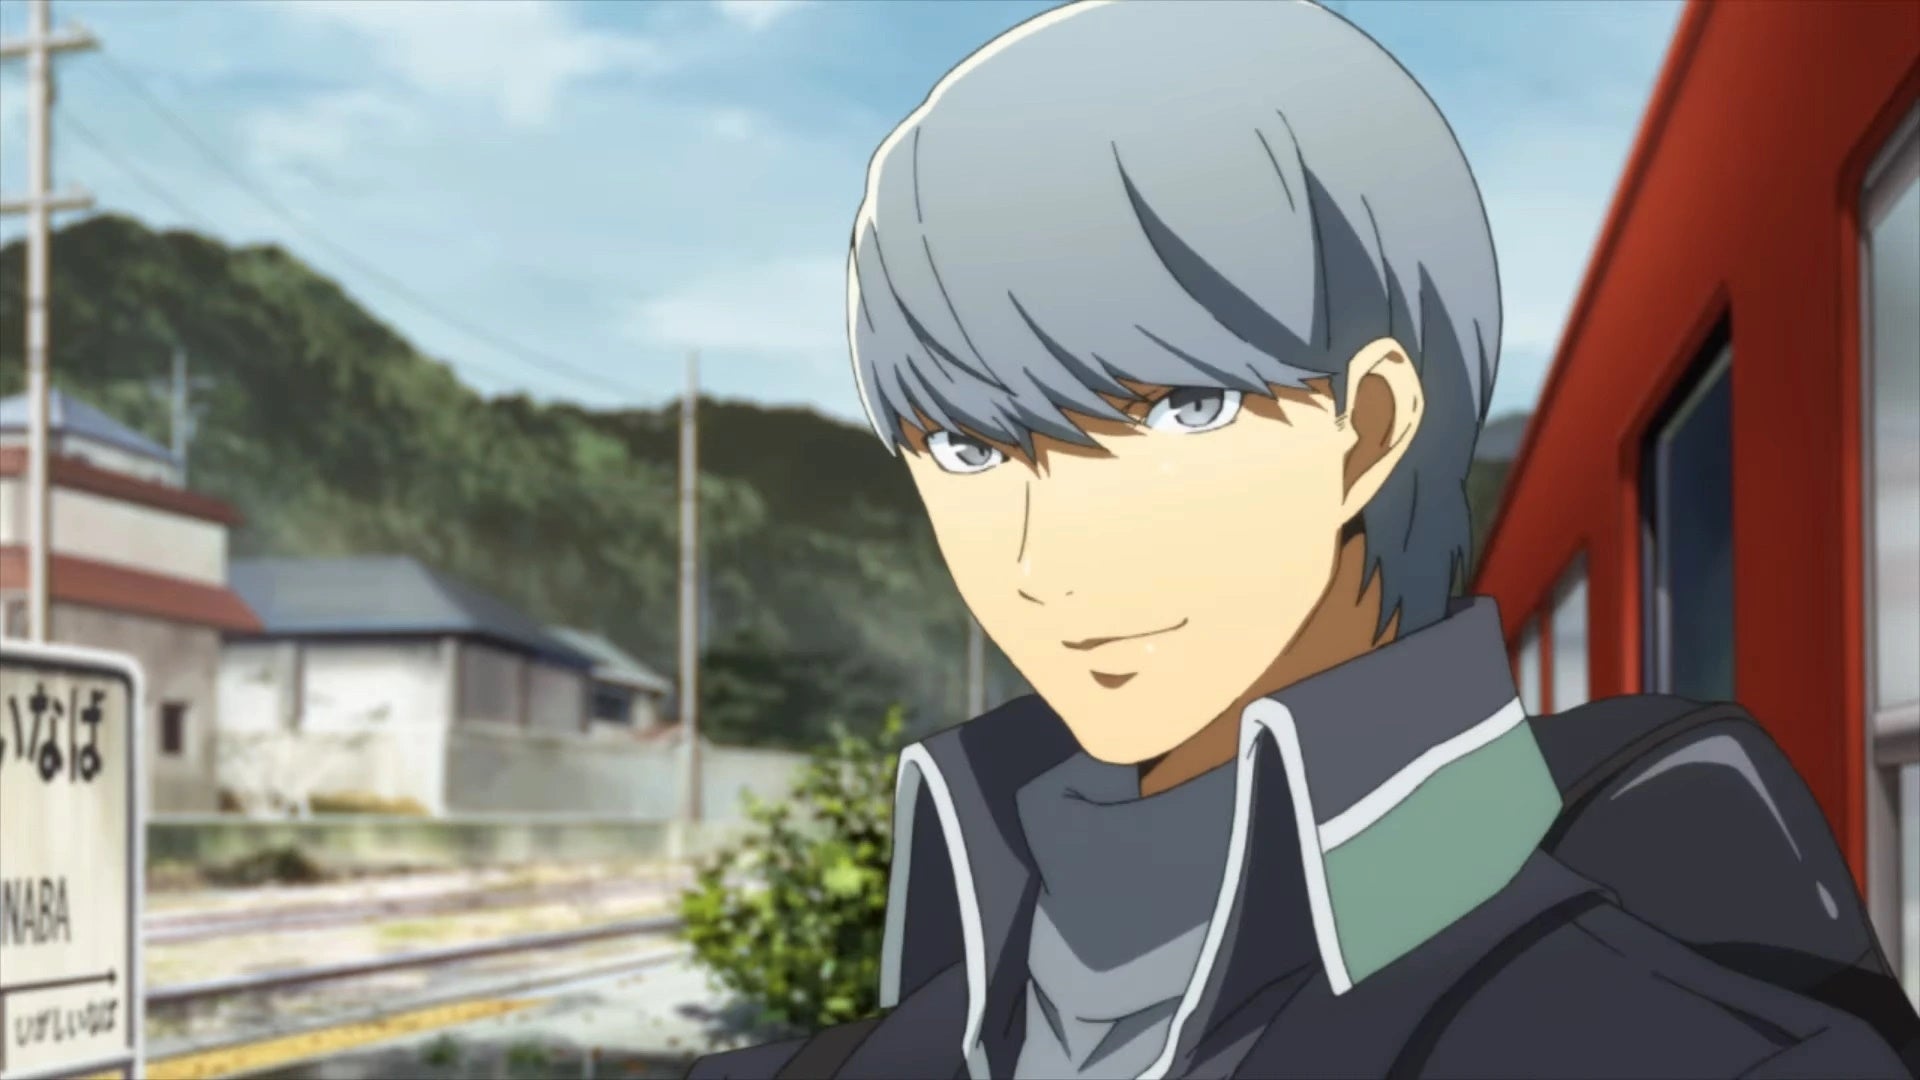 Persona 4 Golden endings: An anime young man with short silver hair, wearing a high-collared jacket and grey shirt, is standing on rural train platform. Across the tracks is a run-down white building